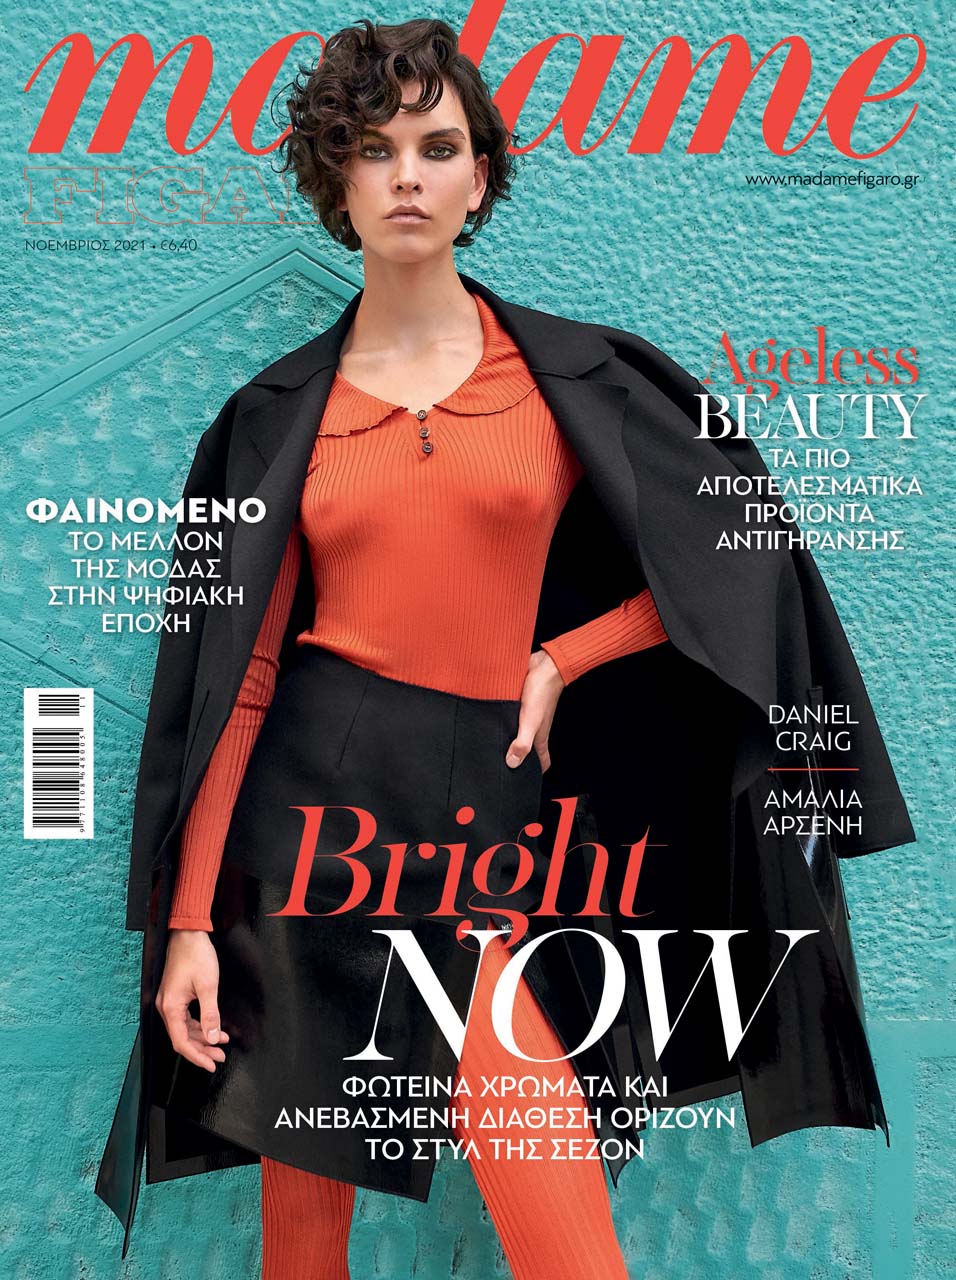 Polina Park on the cover of Madame Figaro